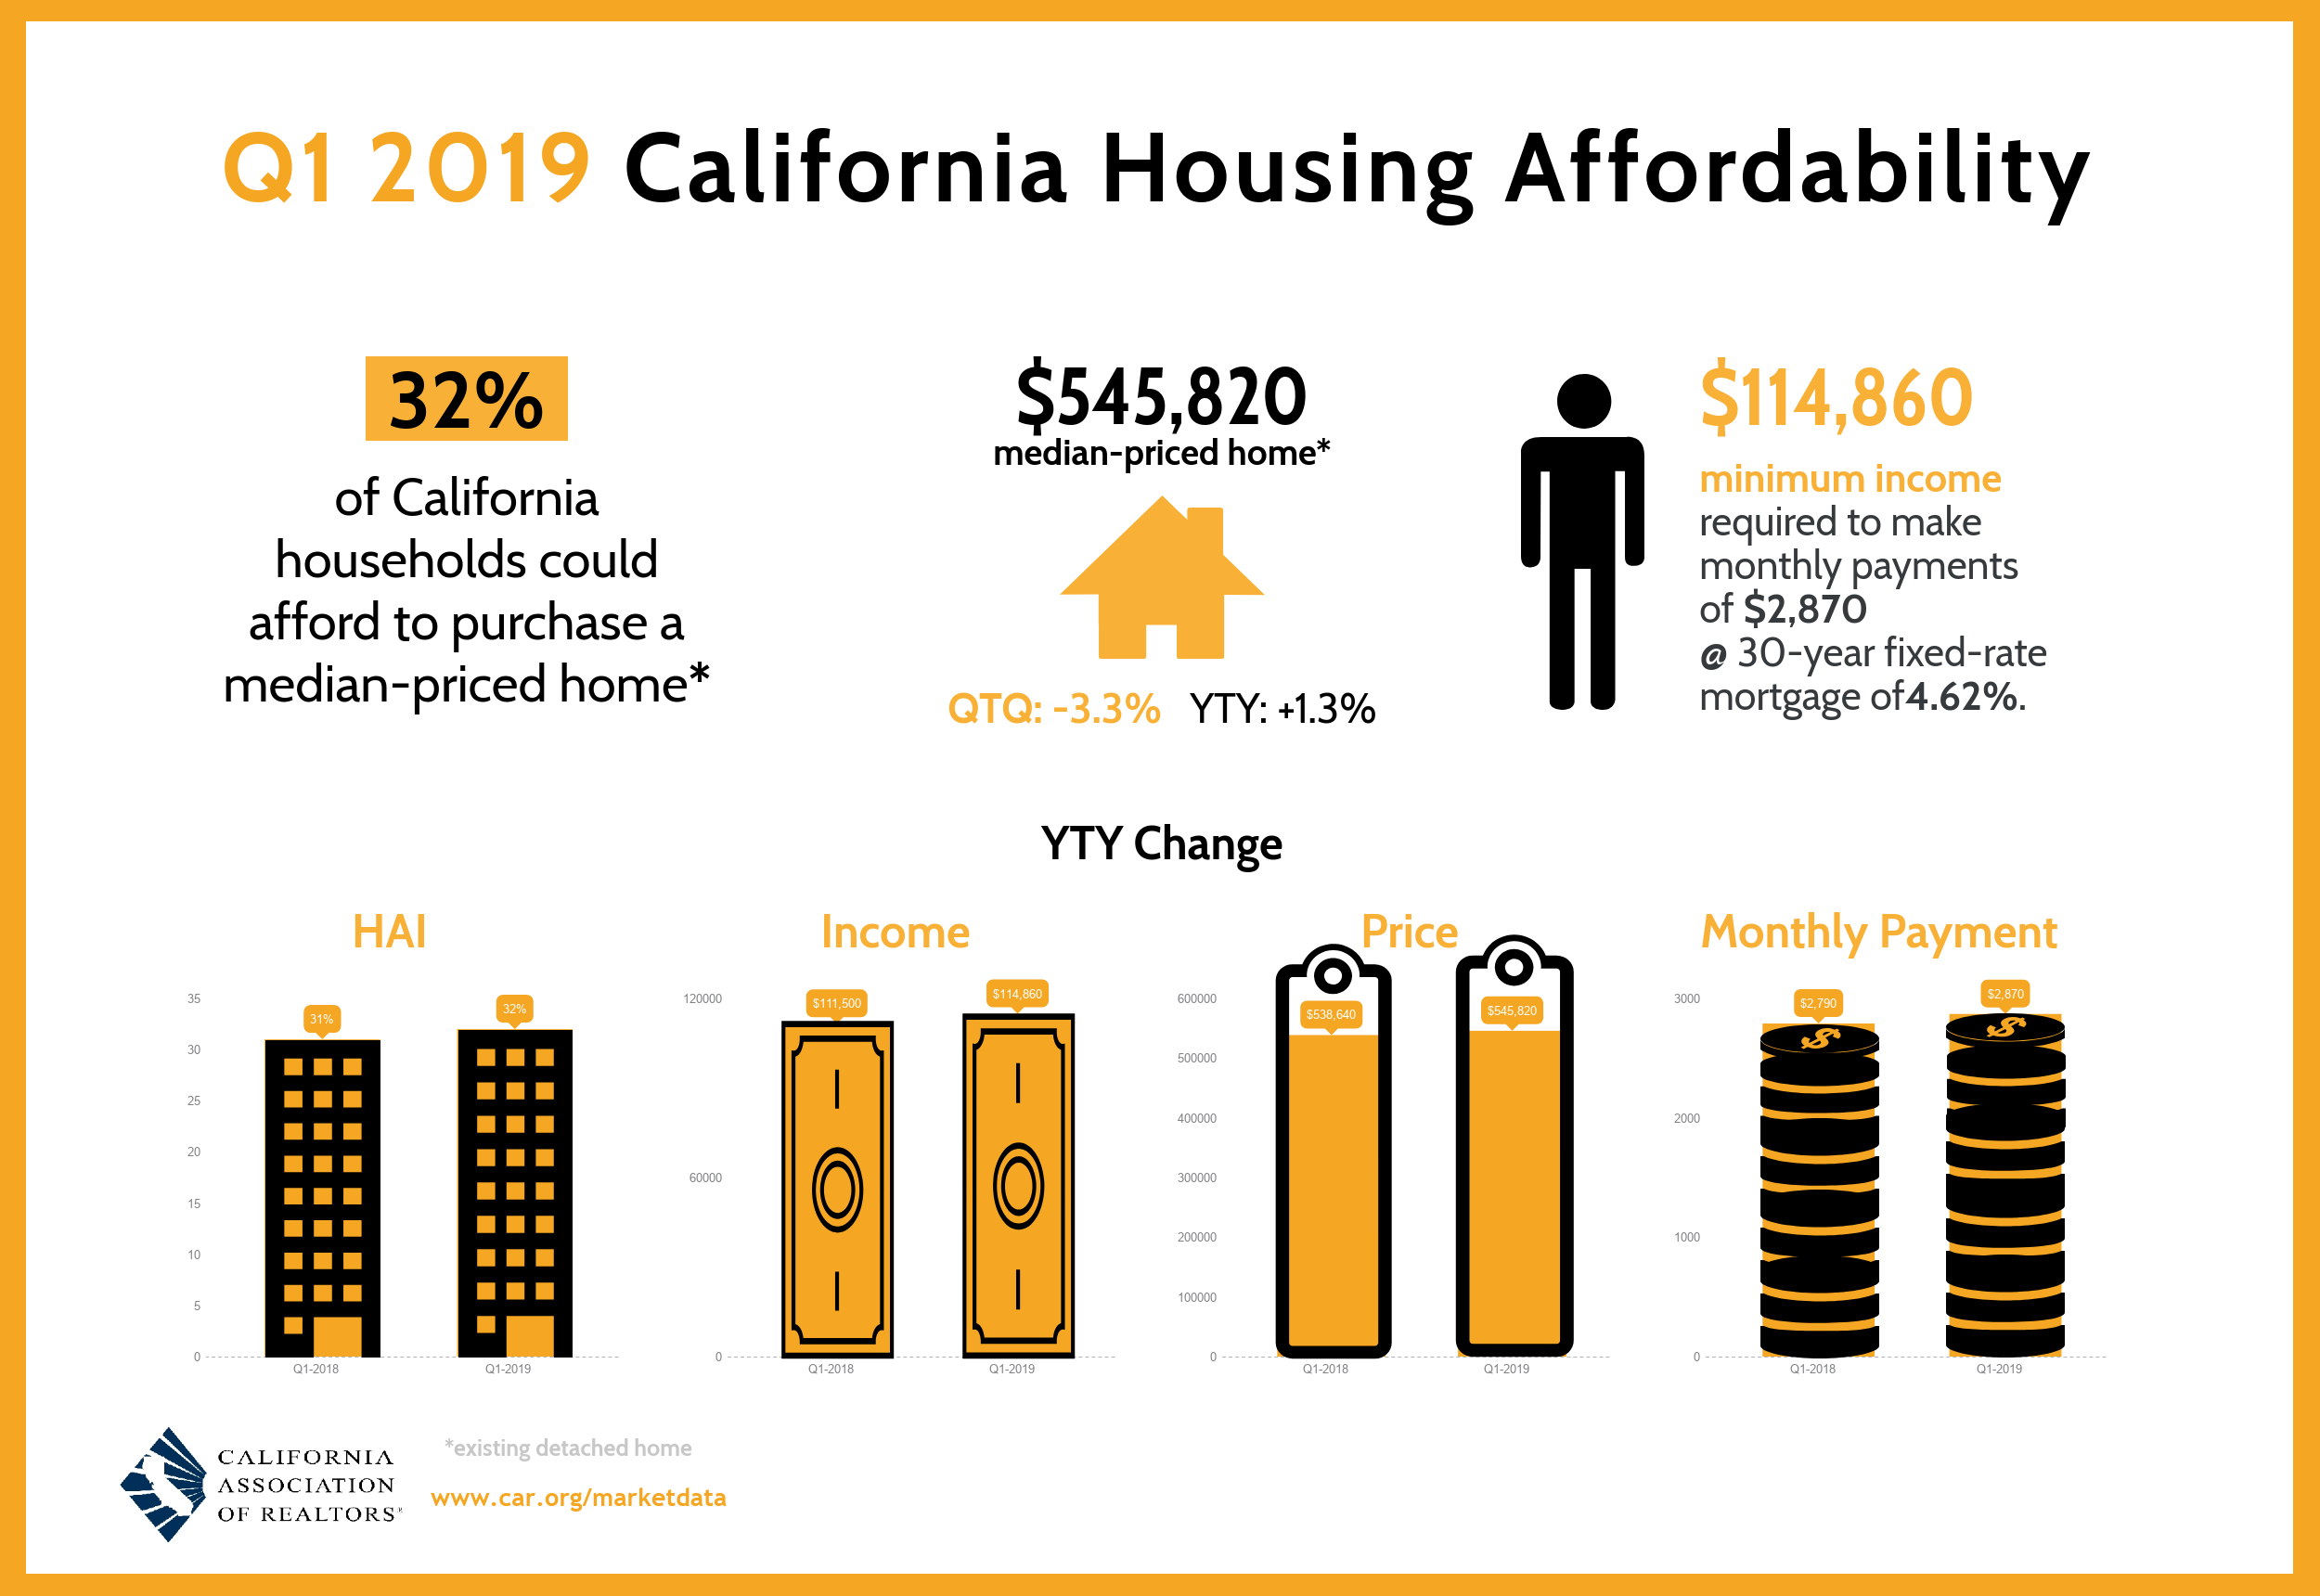 California housing affordability climbs in first quarter 2019, C.A.R. reports